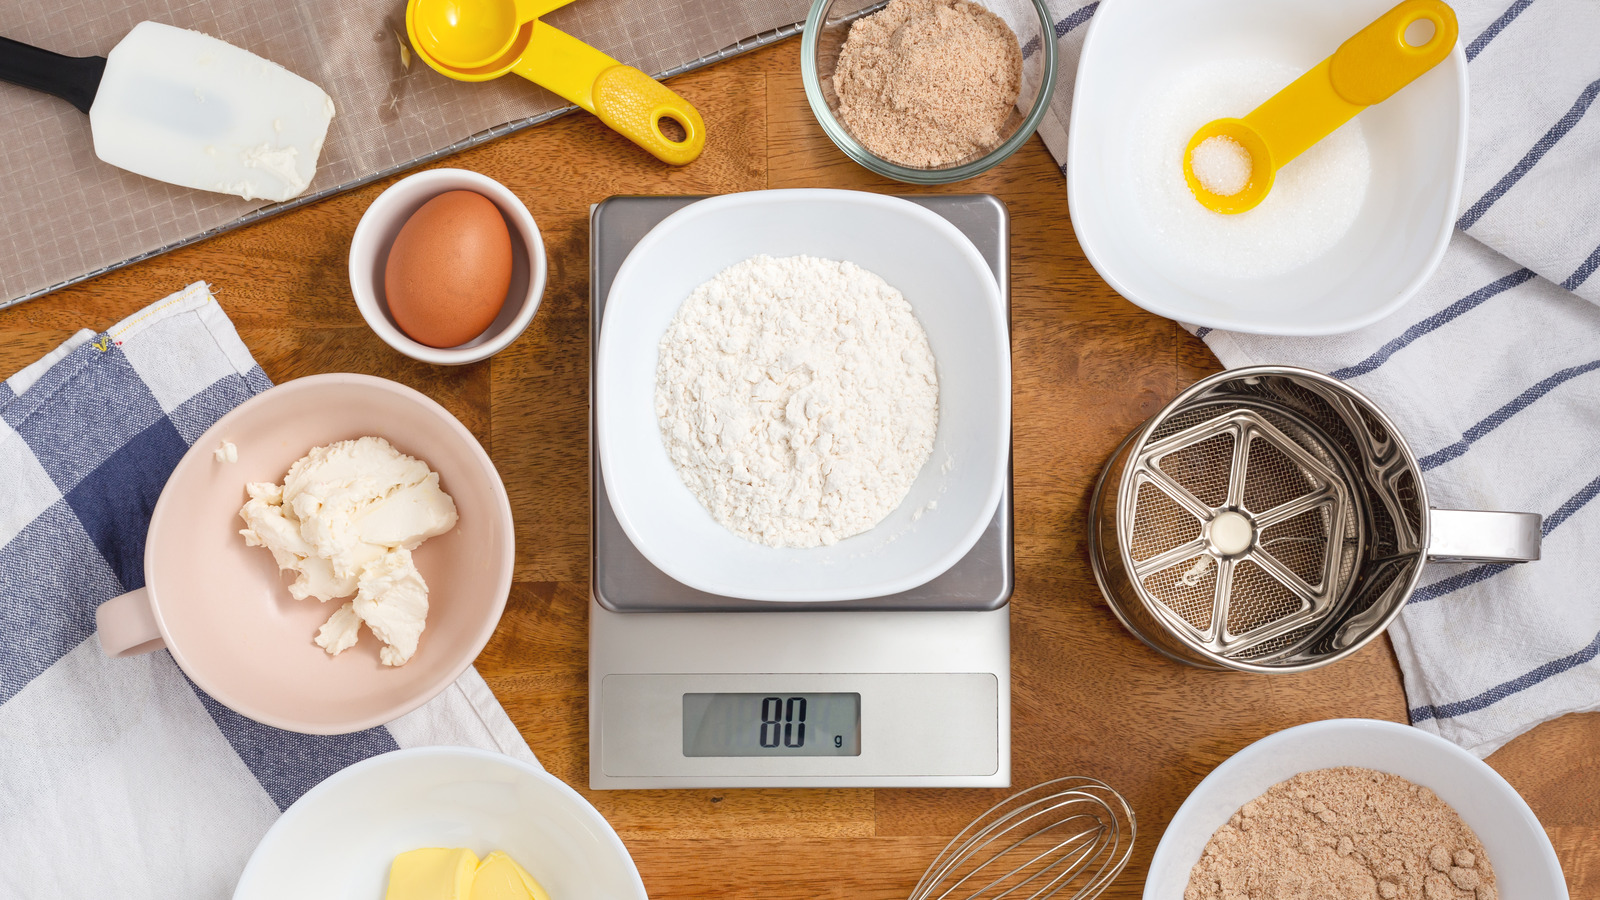 How to Measure Ingredients for Baking